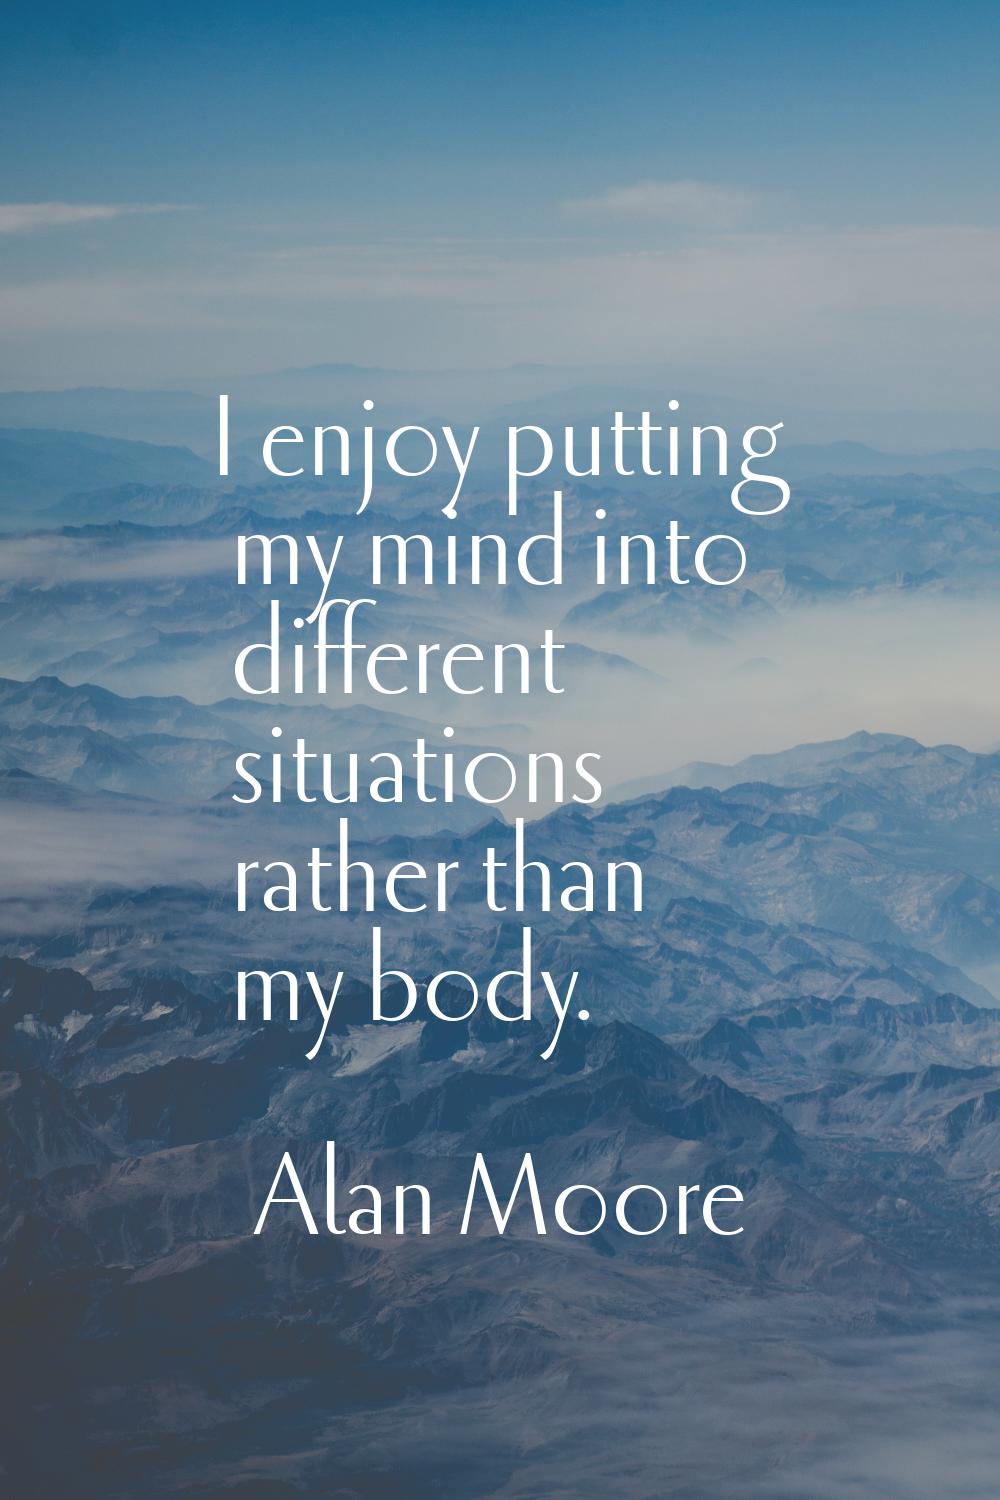 I enjoy putting my mind into different situations rather than my body.